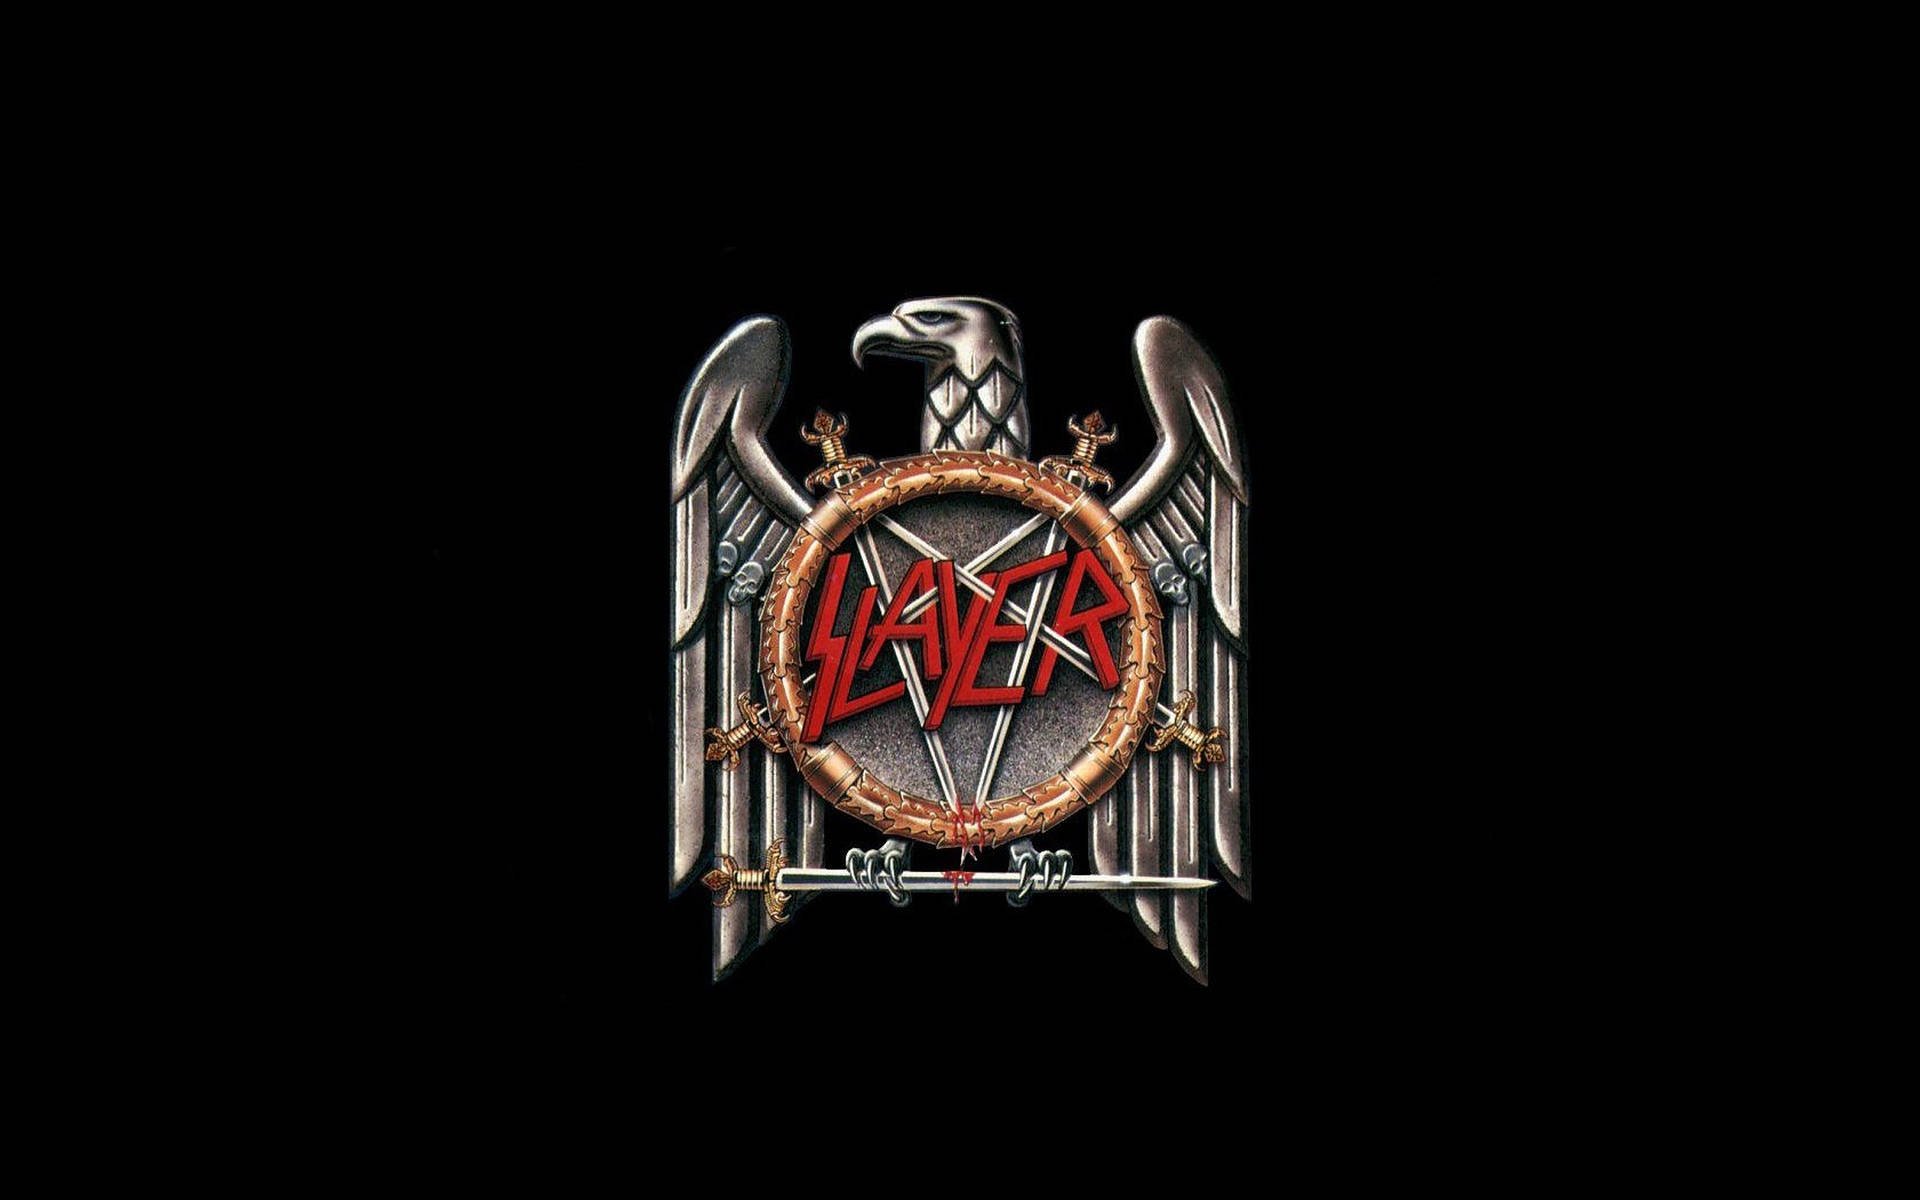 Slayer 2520X1575 Wallpaper and Background Image